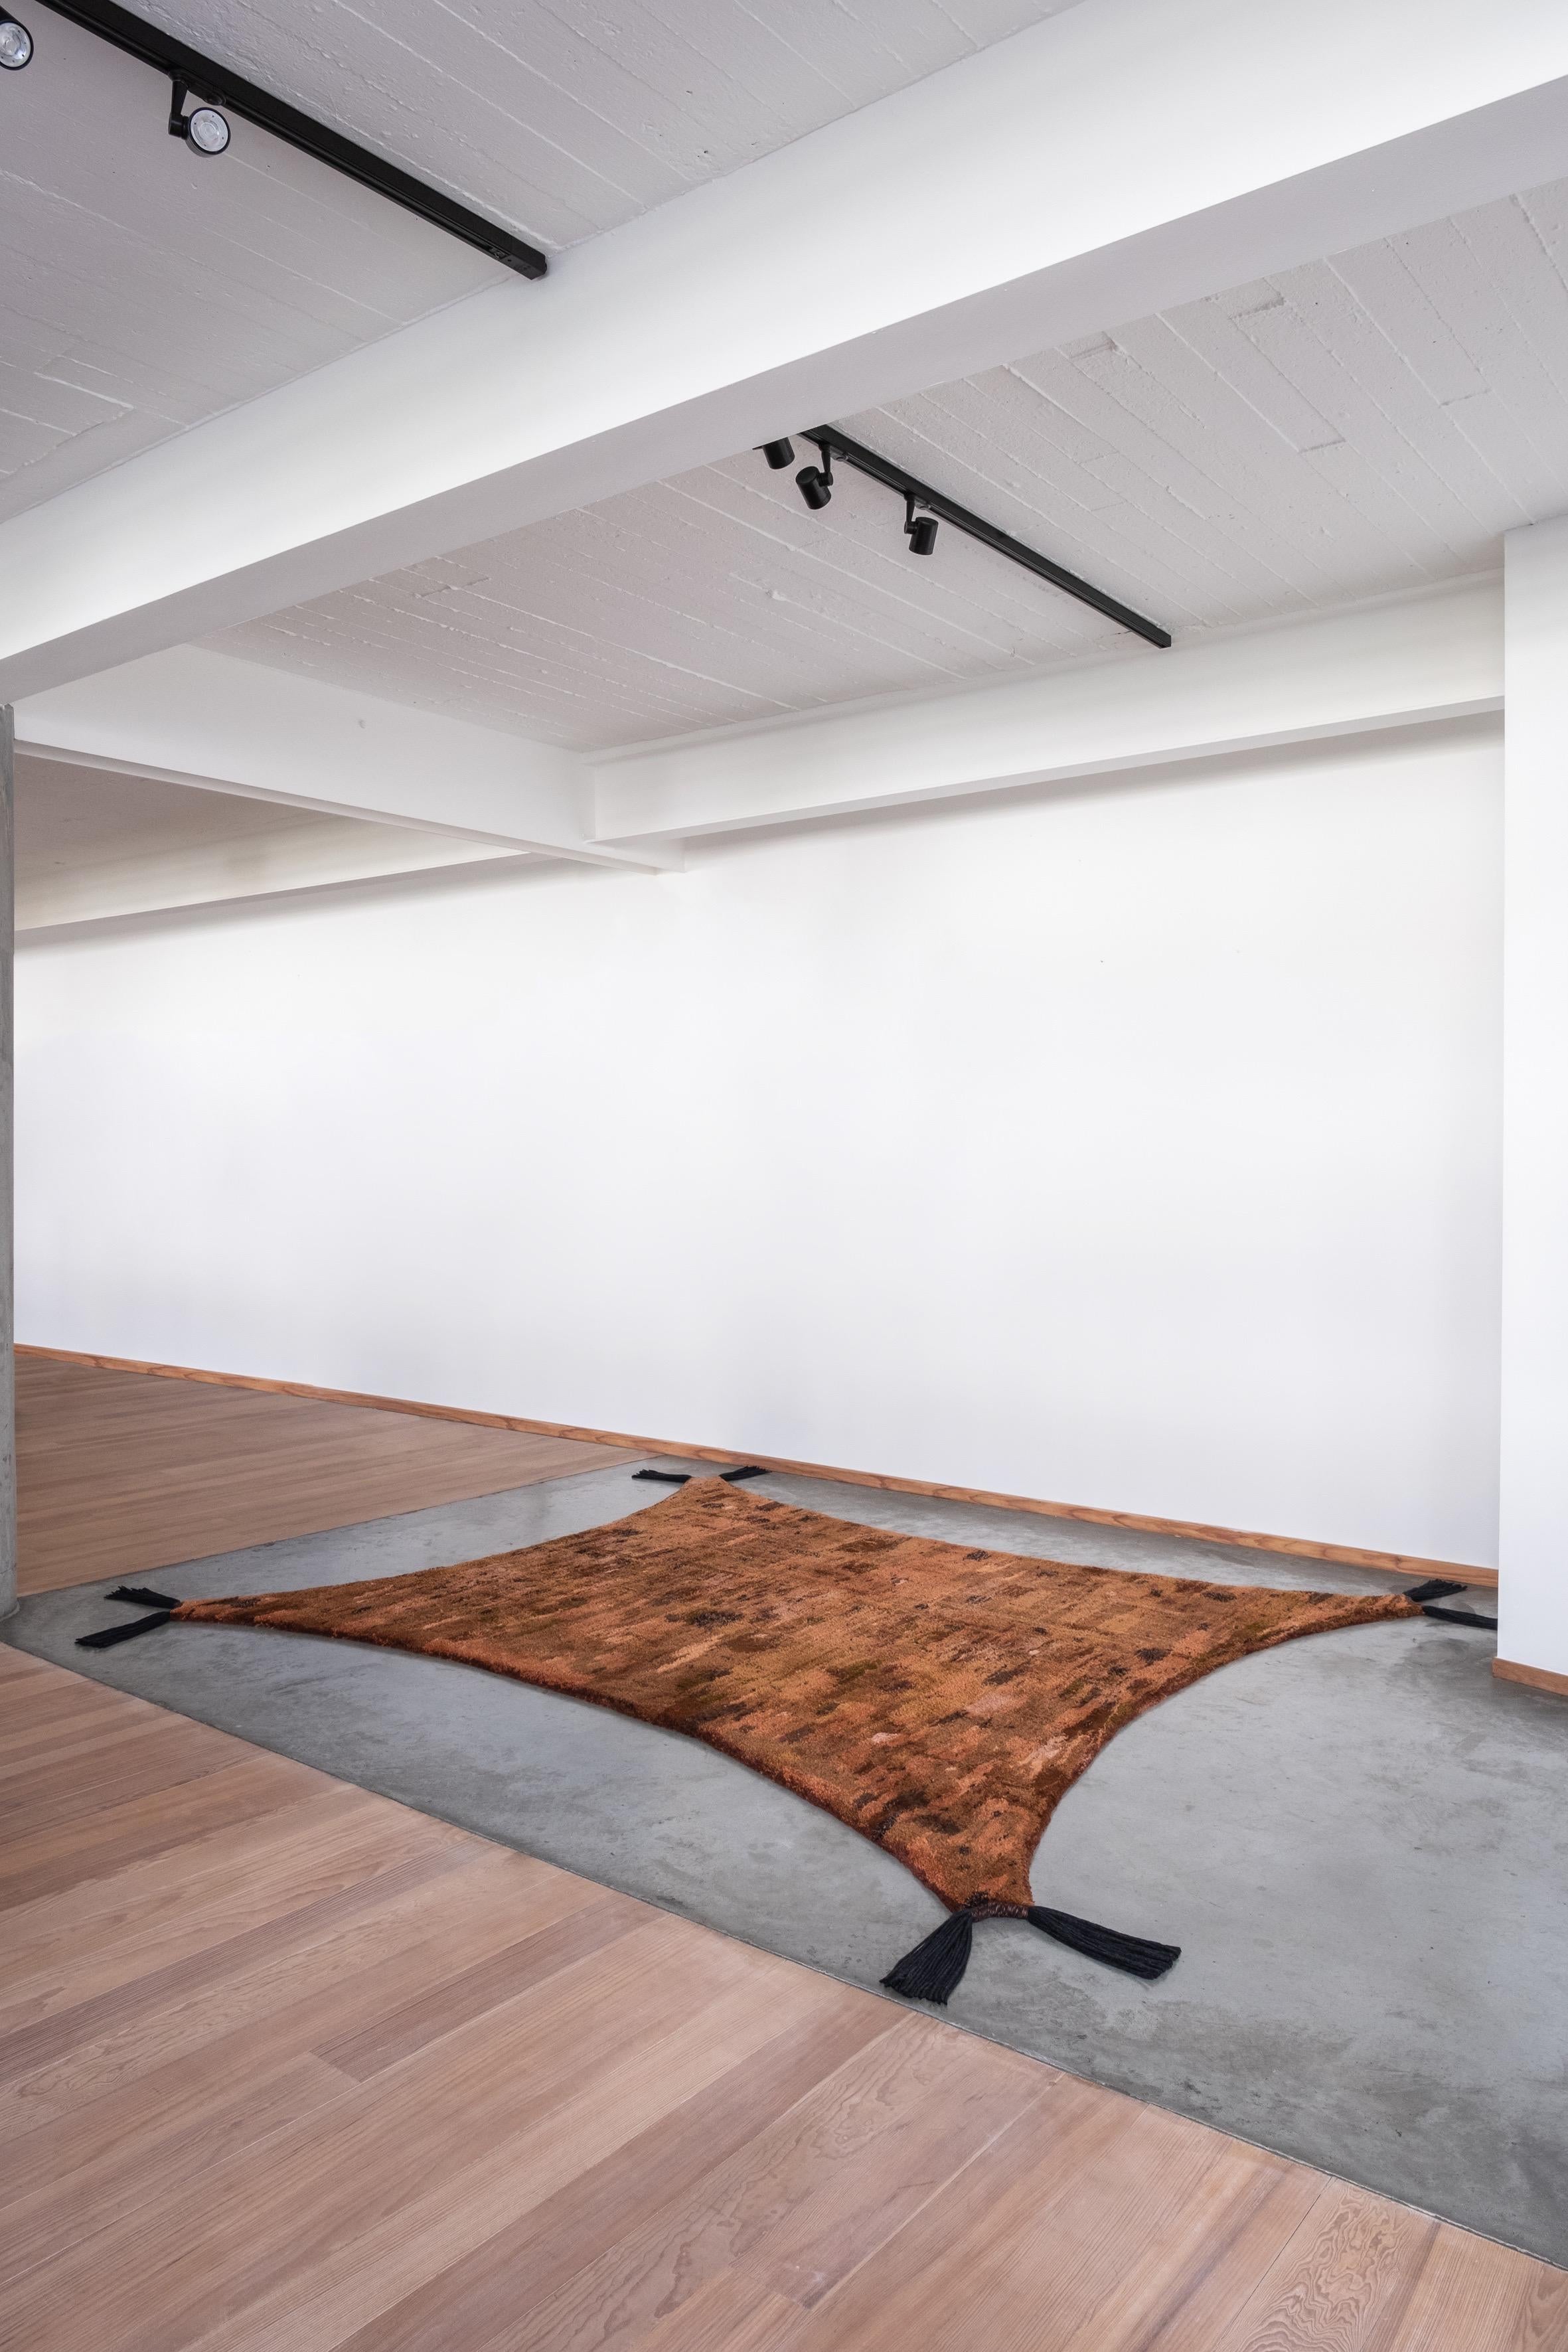 The Creatura rug stretches way beyond the classic - so curious it’s spreading out on exploration to surf further terrain. The corner of the expanding shape move radically outwards as if it’s caught in a performative momentum. Hostile to its being,